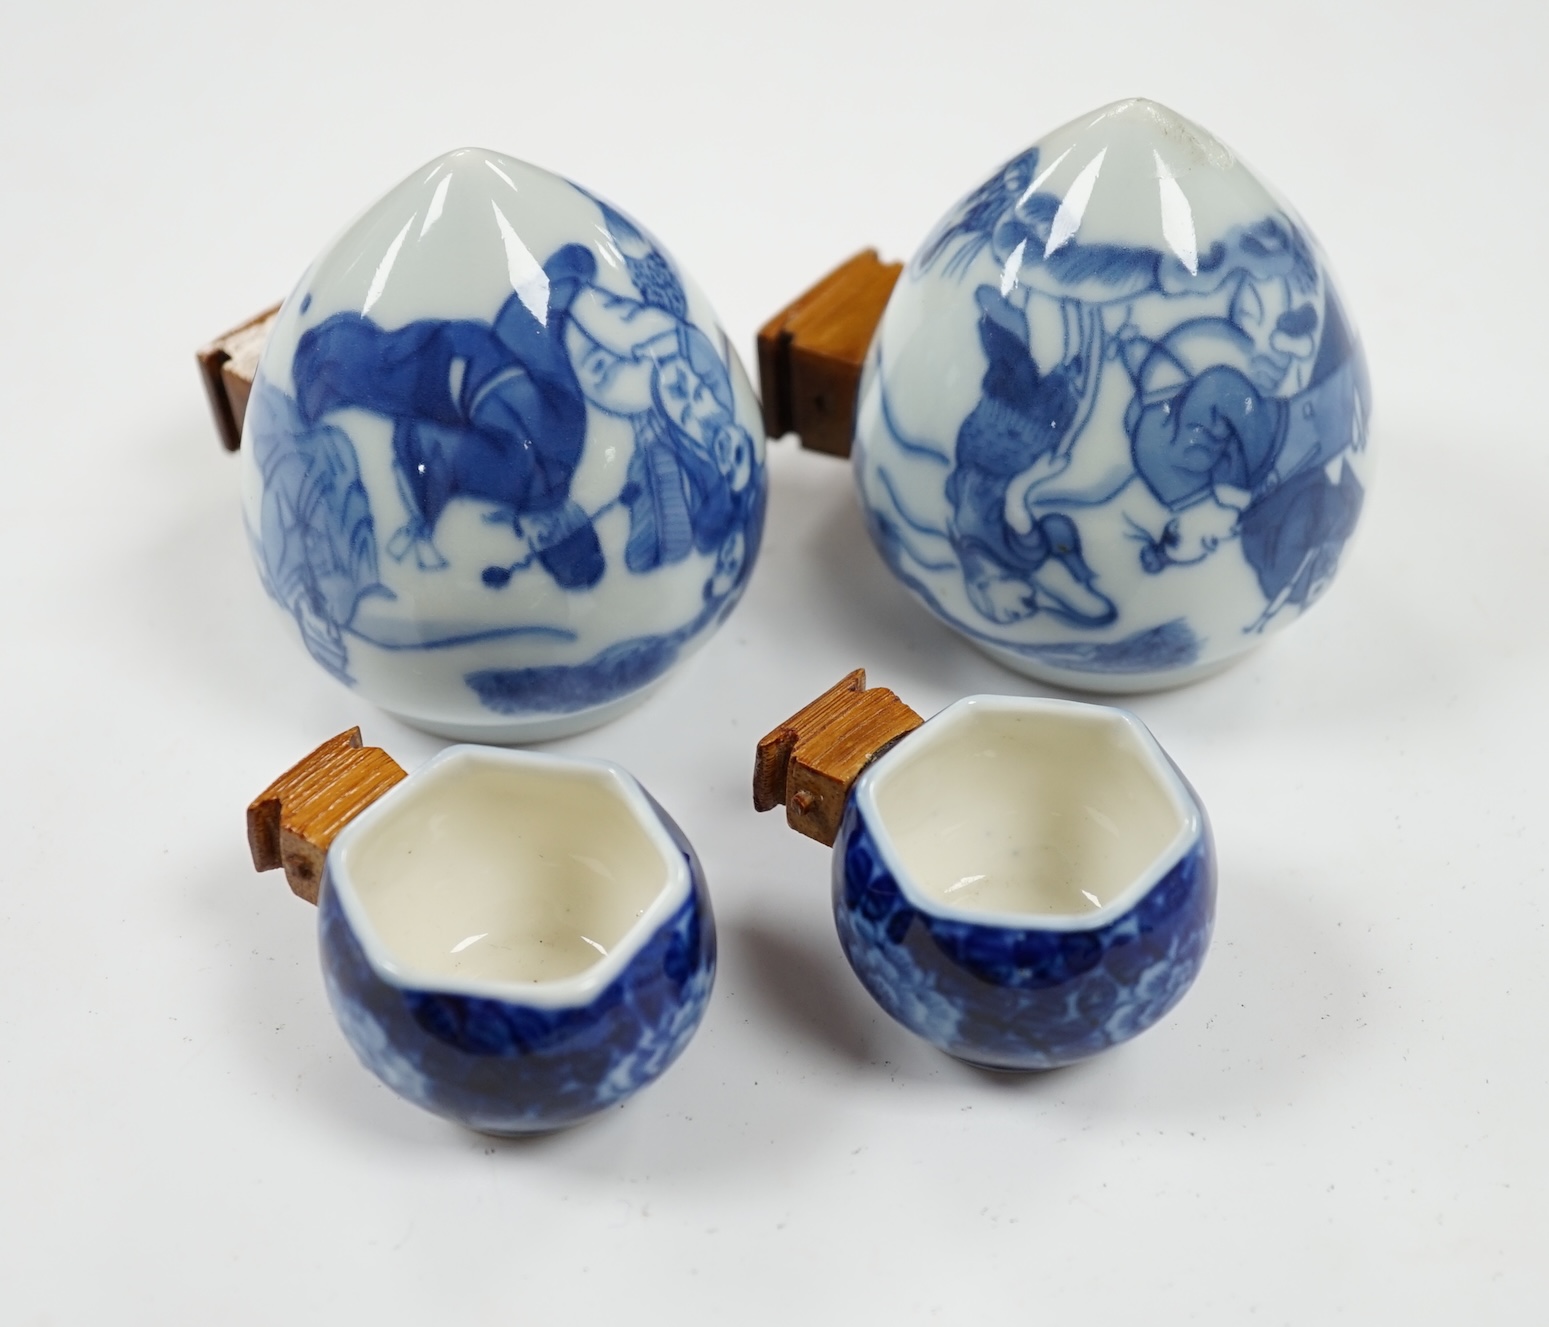 Four Chinese blue and white porcelain bird feeders, largest 7cm high. Condition - good, some glue residue